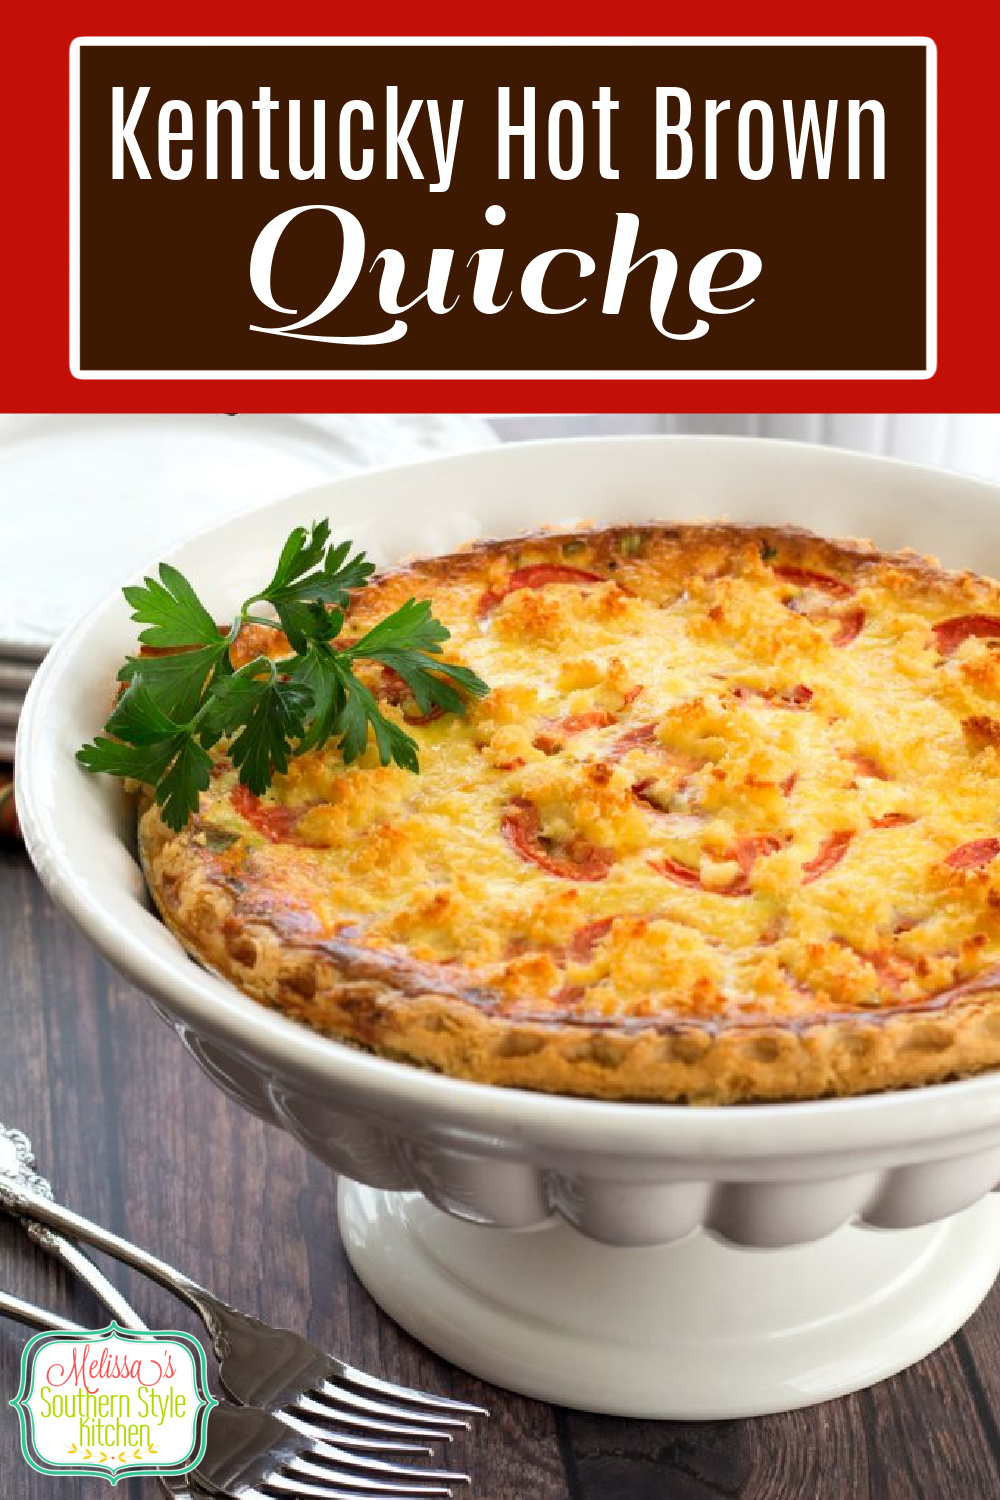 This easy Cheesy Kentucky Hot Brown Quiche features all of the flavors of the famous hot brown sandwich and transforms them into a delicious quiche #hotbrown #kentuckyhotbrown #quiche #hotbrownquiche #turkeyrecipes #brunch #holidaybrunch #quicherecipes #southernfood #southernrecipes